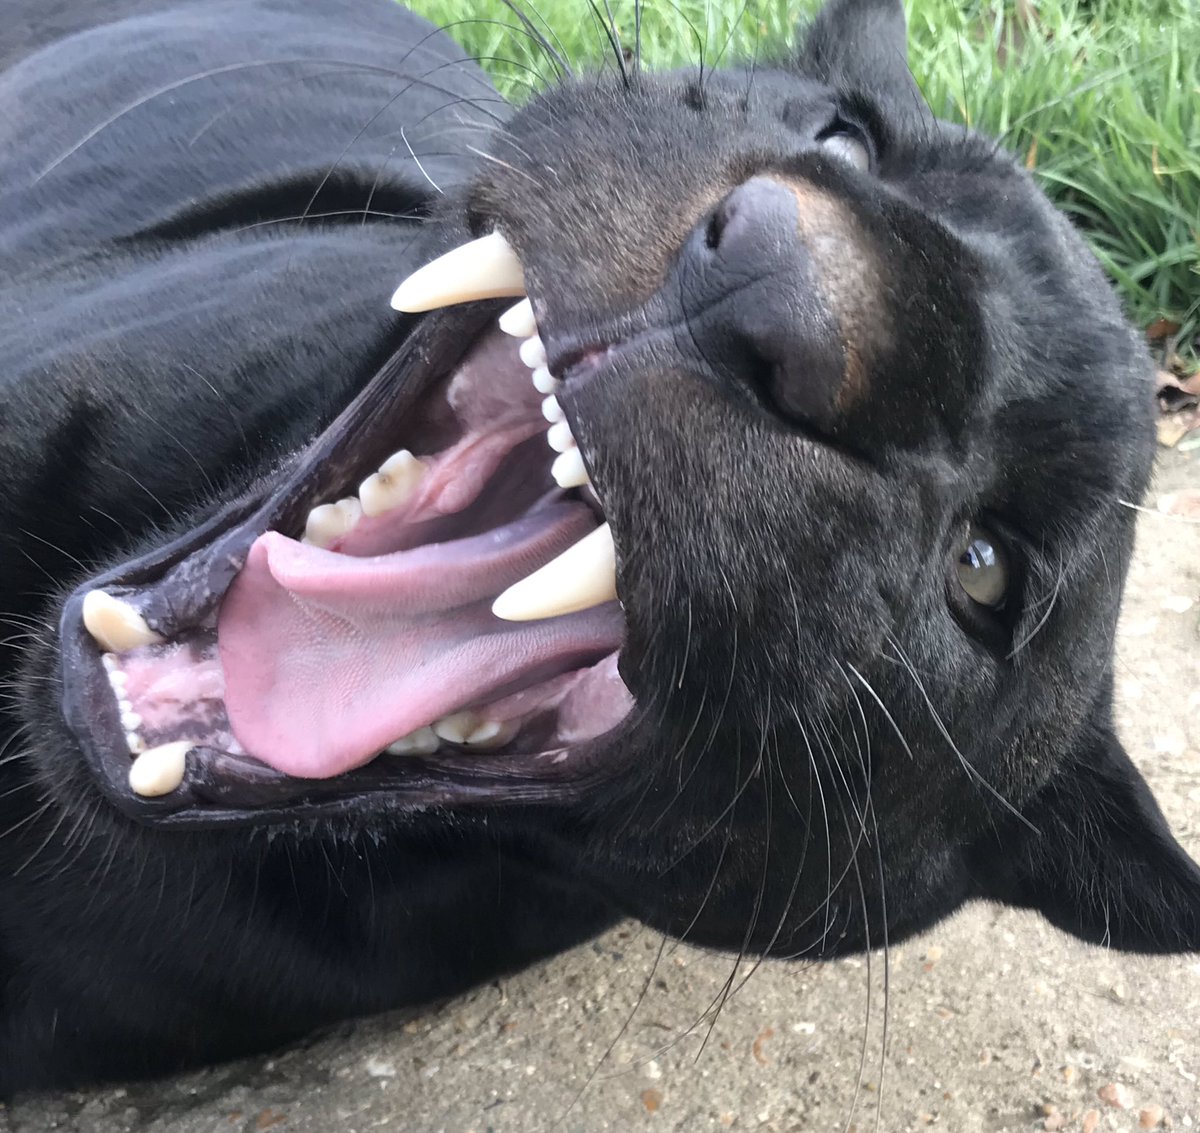 Double Bubble - it’s tongue and teeth out Tuesday from little old me!! Hahaha! #mayathejaguar 🖤🐾 #bigcatsaboutthehouse #tot #tongueouttuesday #teethouttuesday #thatfacetho #bigteeth @TheBigCatSanct